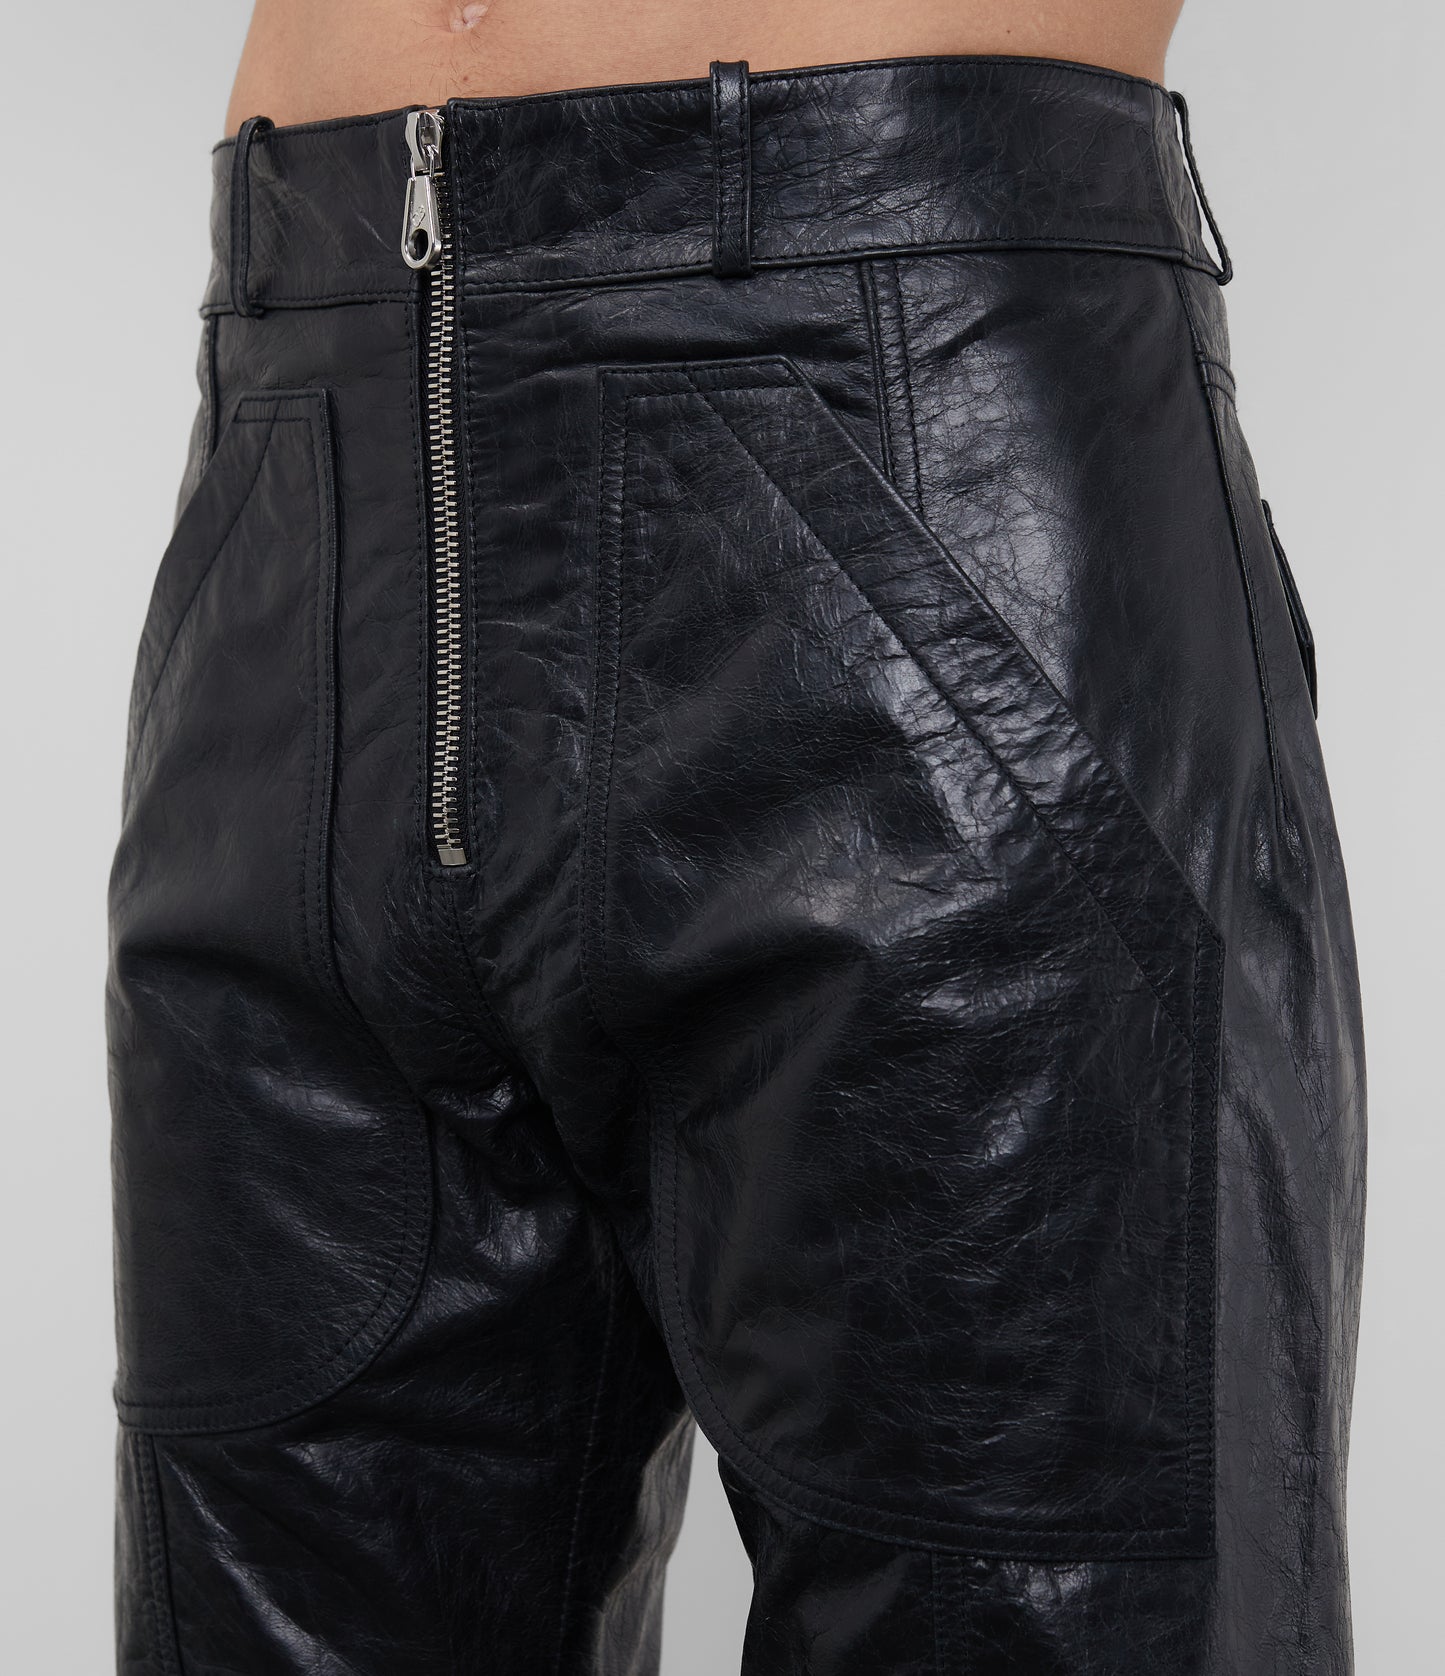 LEATHER STACKED CARPENTER PANT